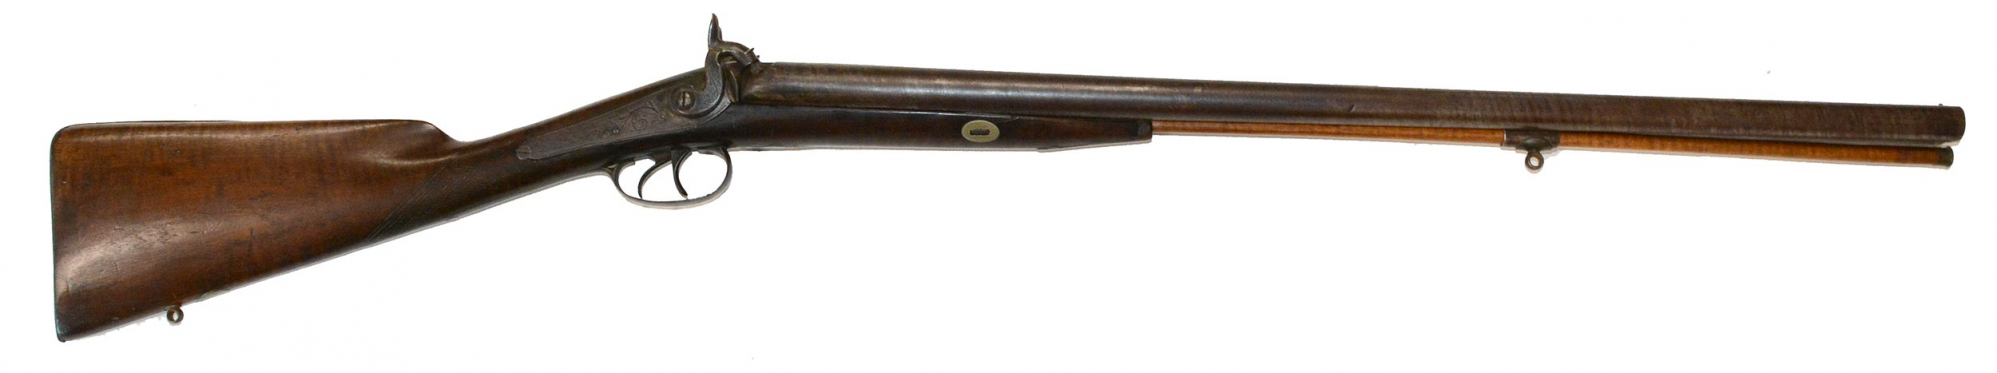 CONFEDERATE USED AND ISSUED SOUTHERN MADE SHOTGUN